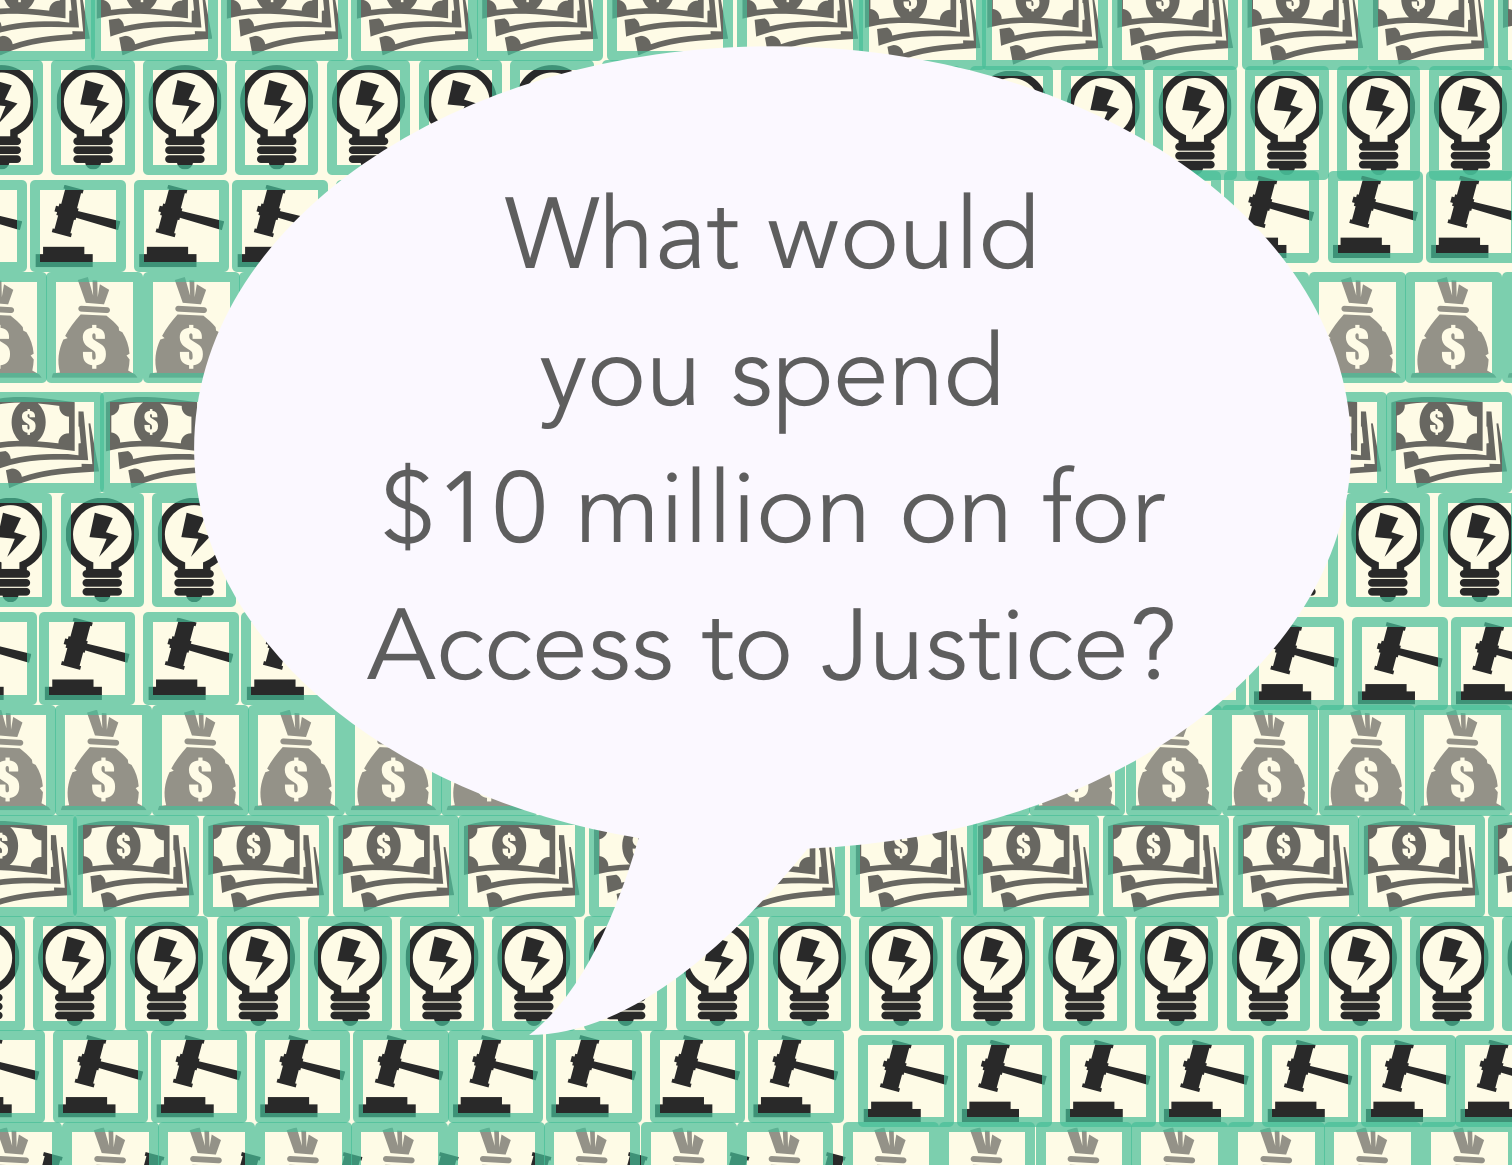 Access to Justice - what would you spend 10 million dollars on